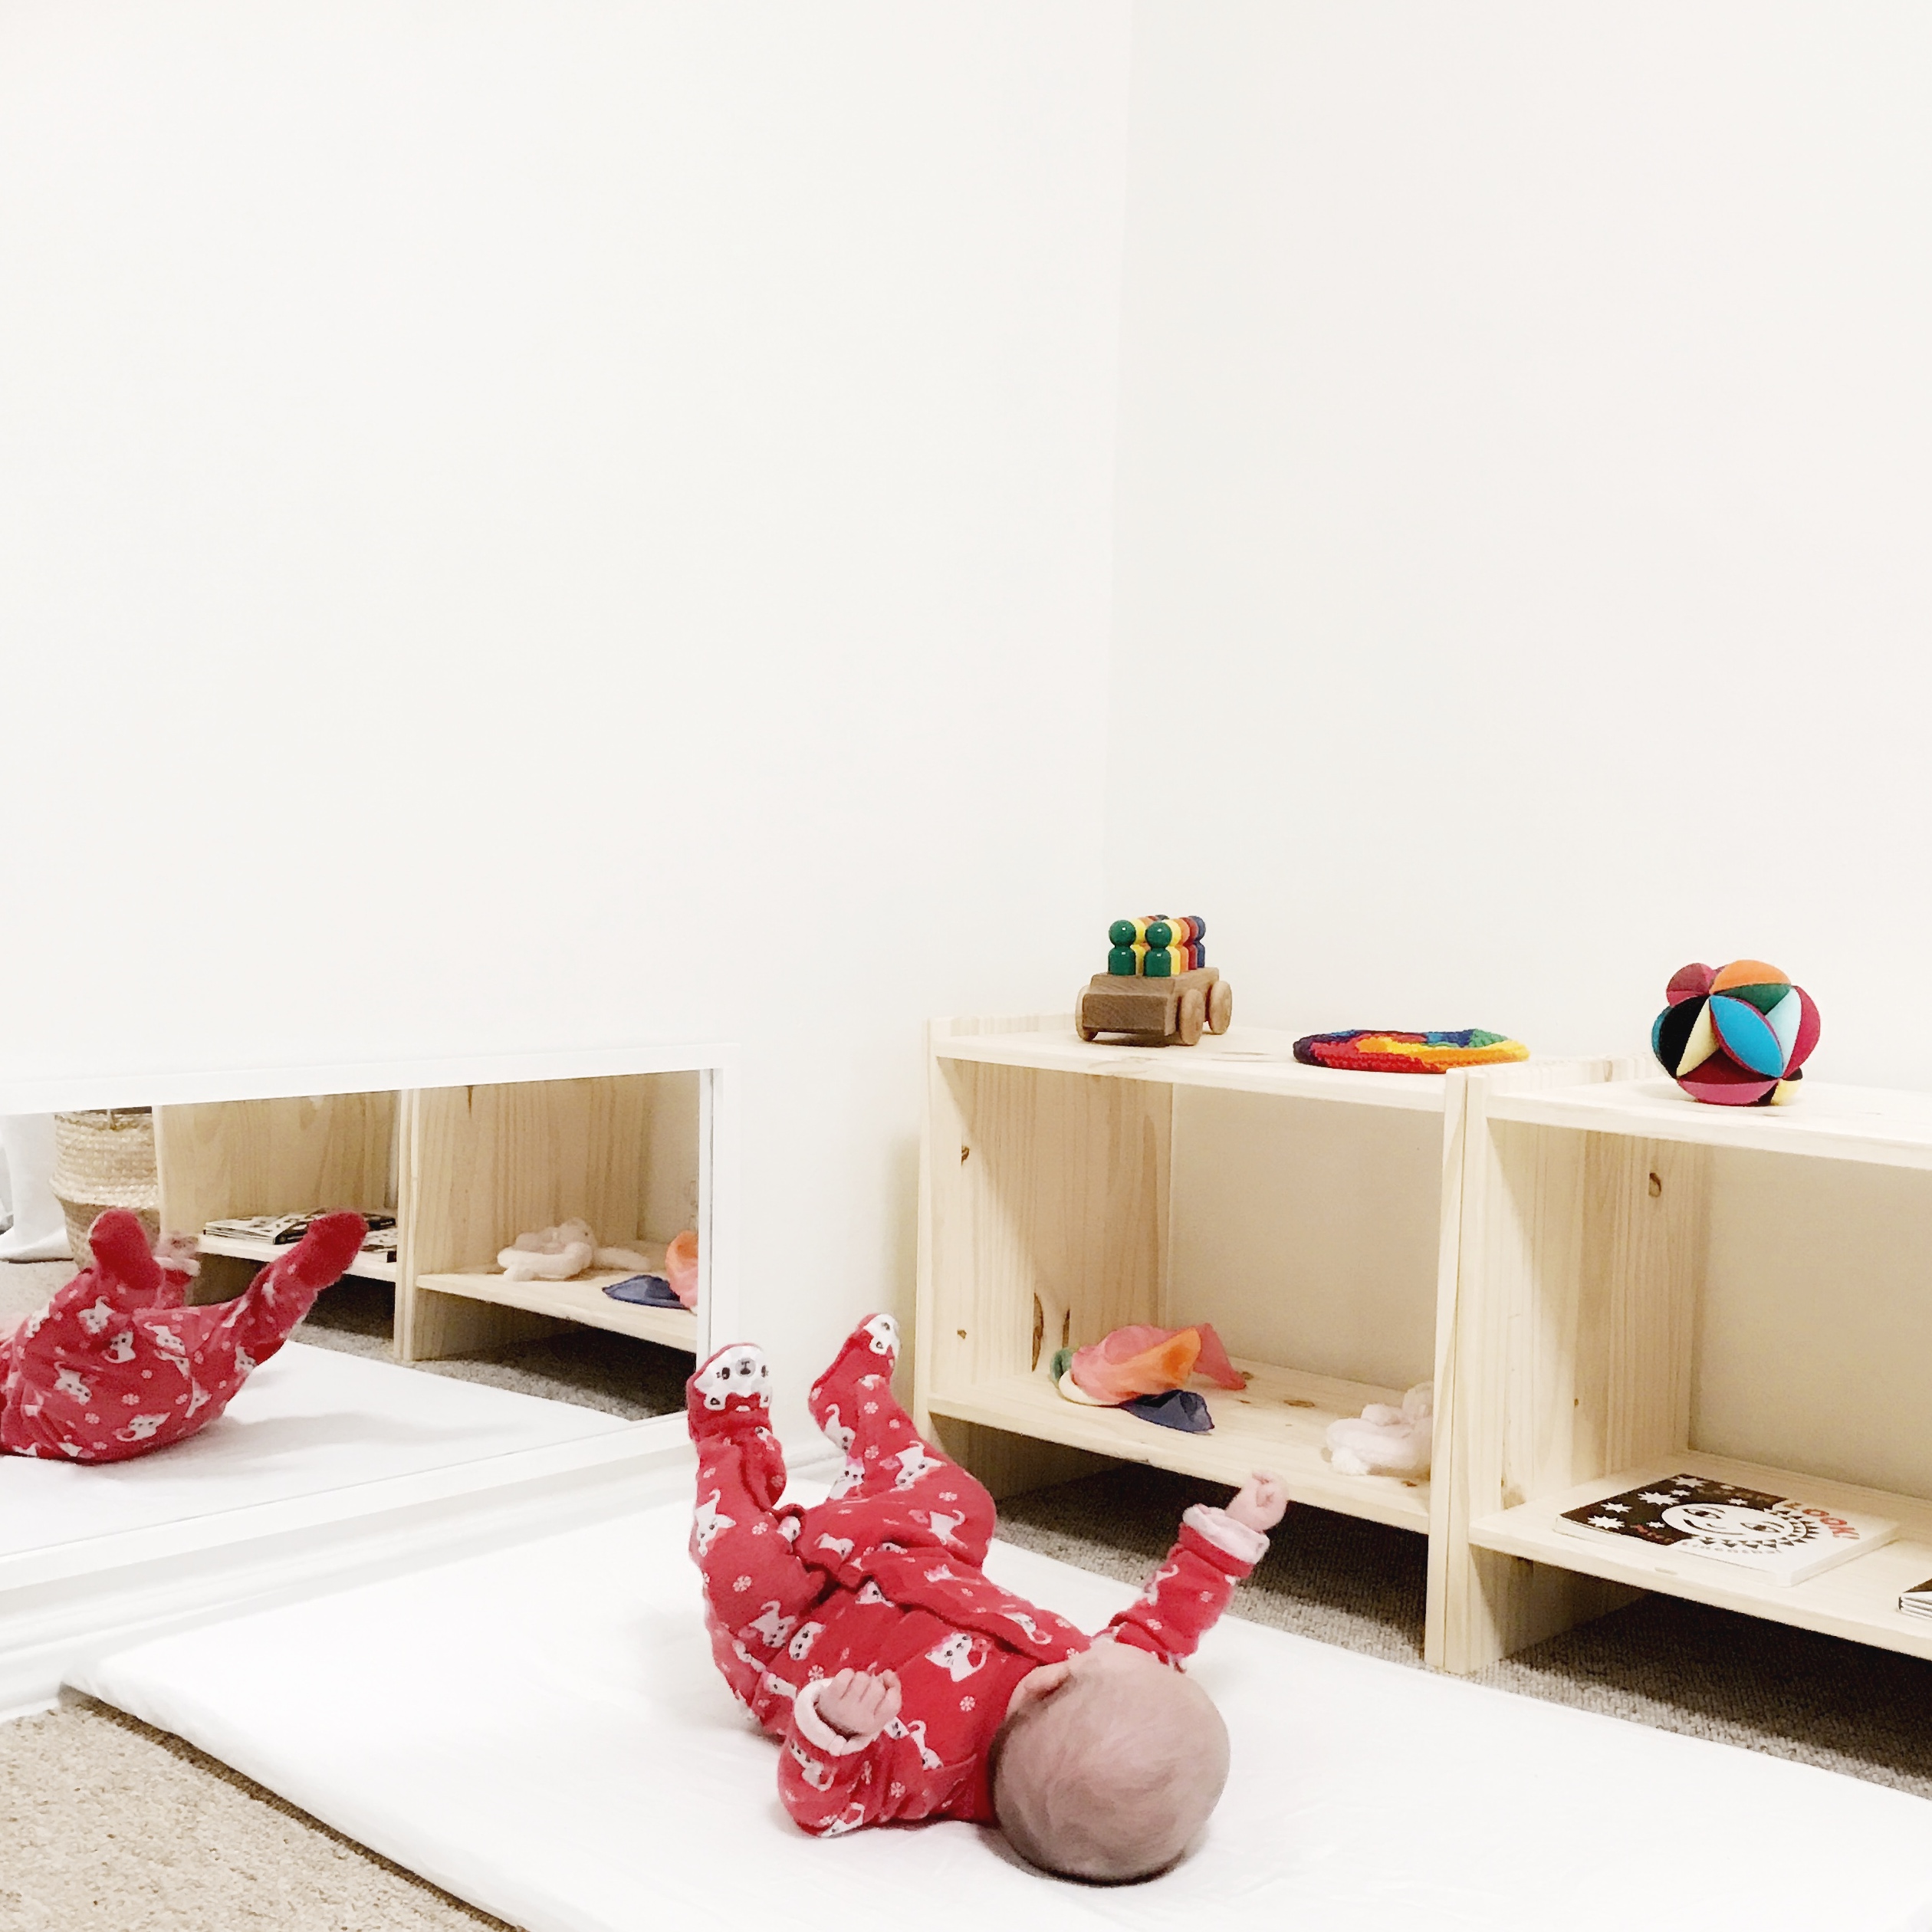 montessori-infant-play-space-at-home